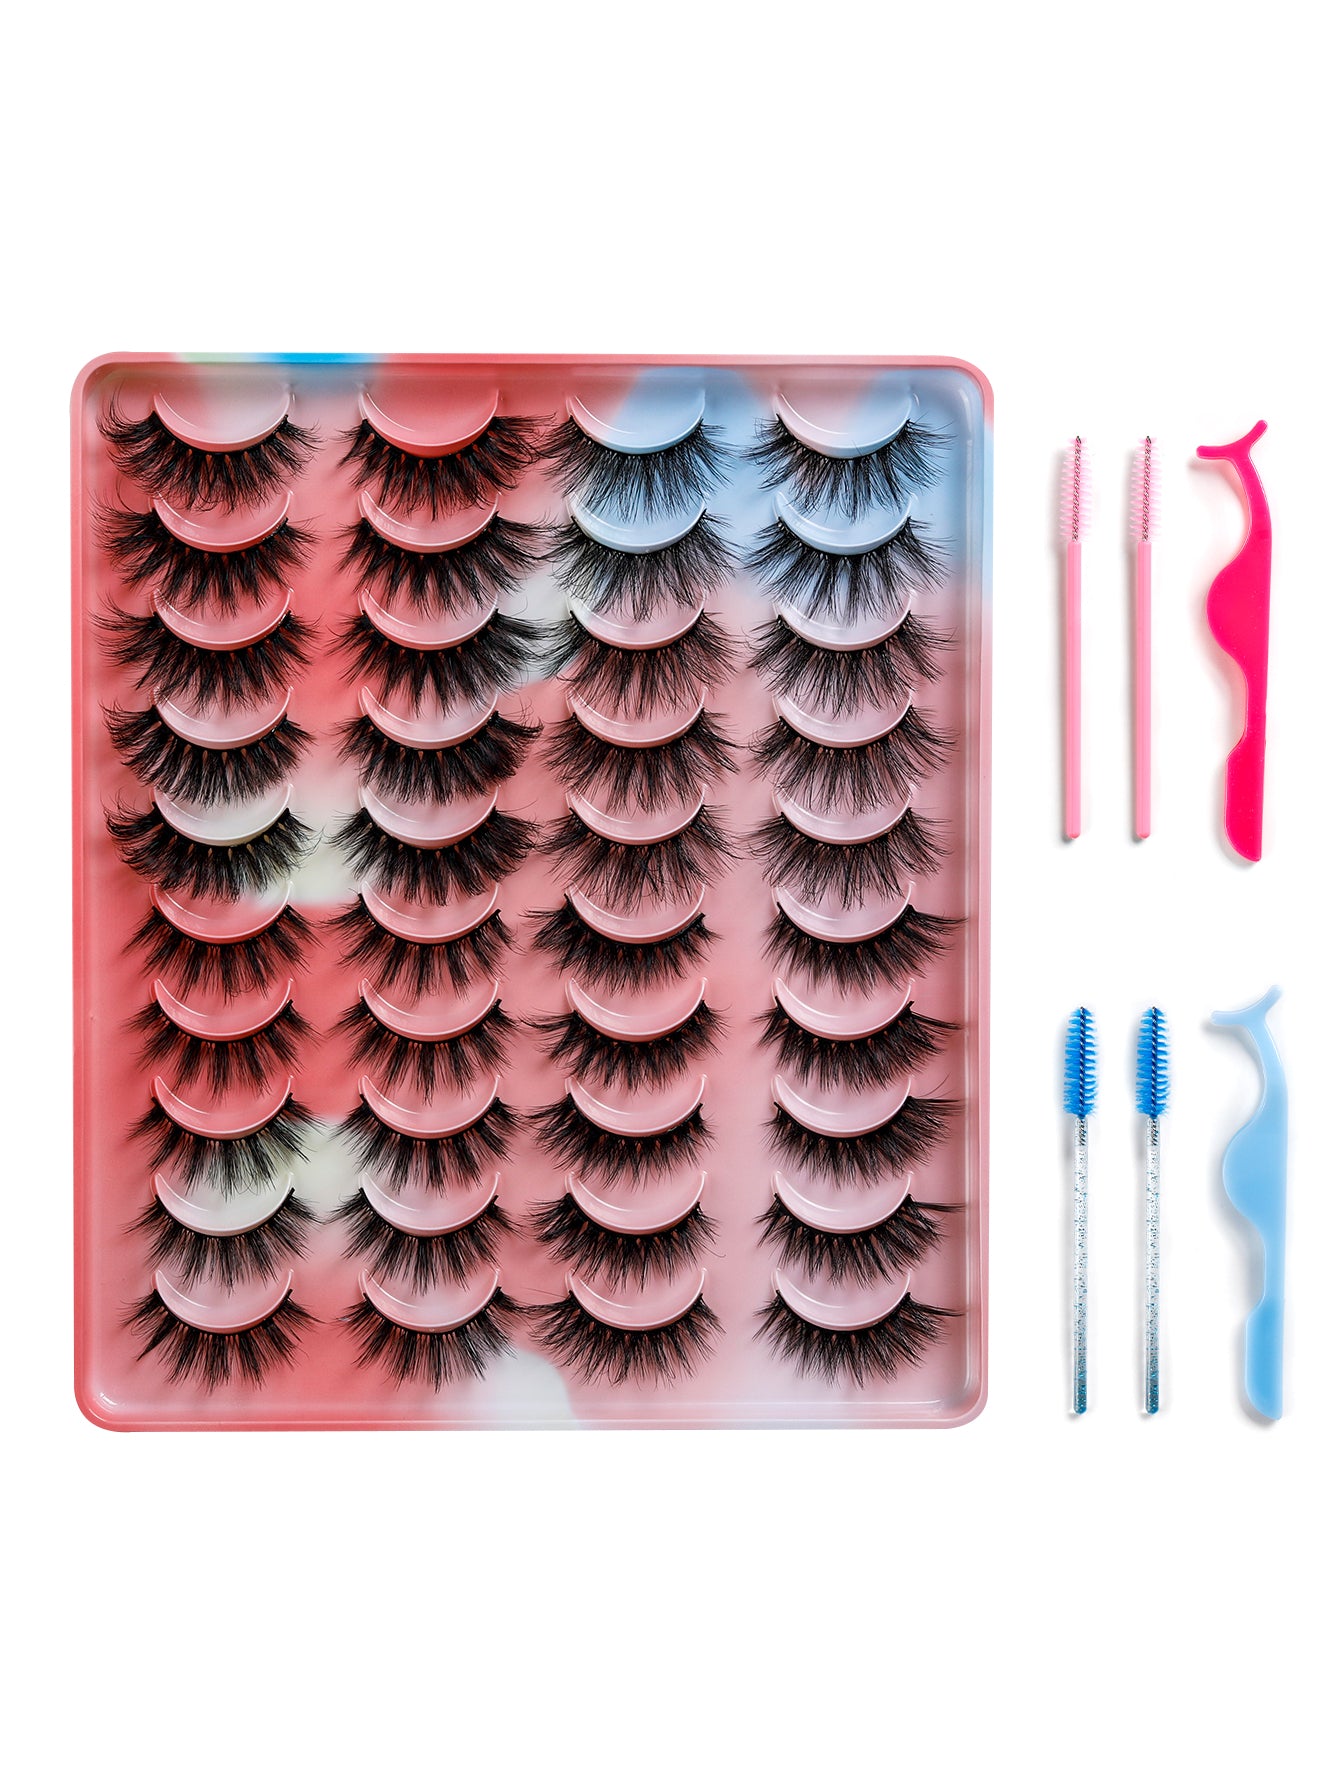 20 Pairs Faux Mink Lashes-MIX STYLES